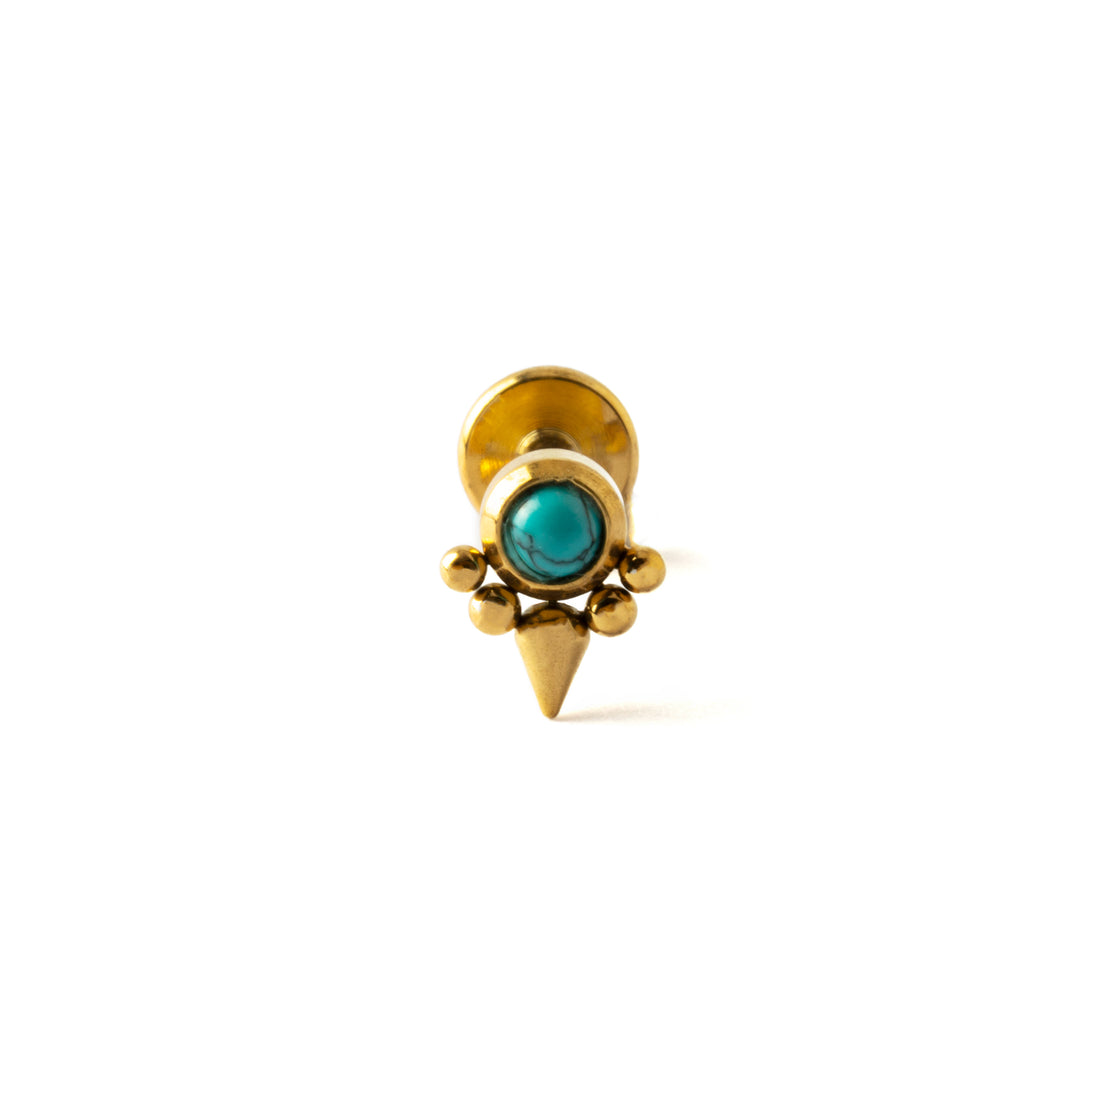 Elvira Gold surgical steel internally threaded Labret with Turquoise frontal view